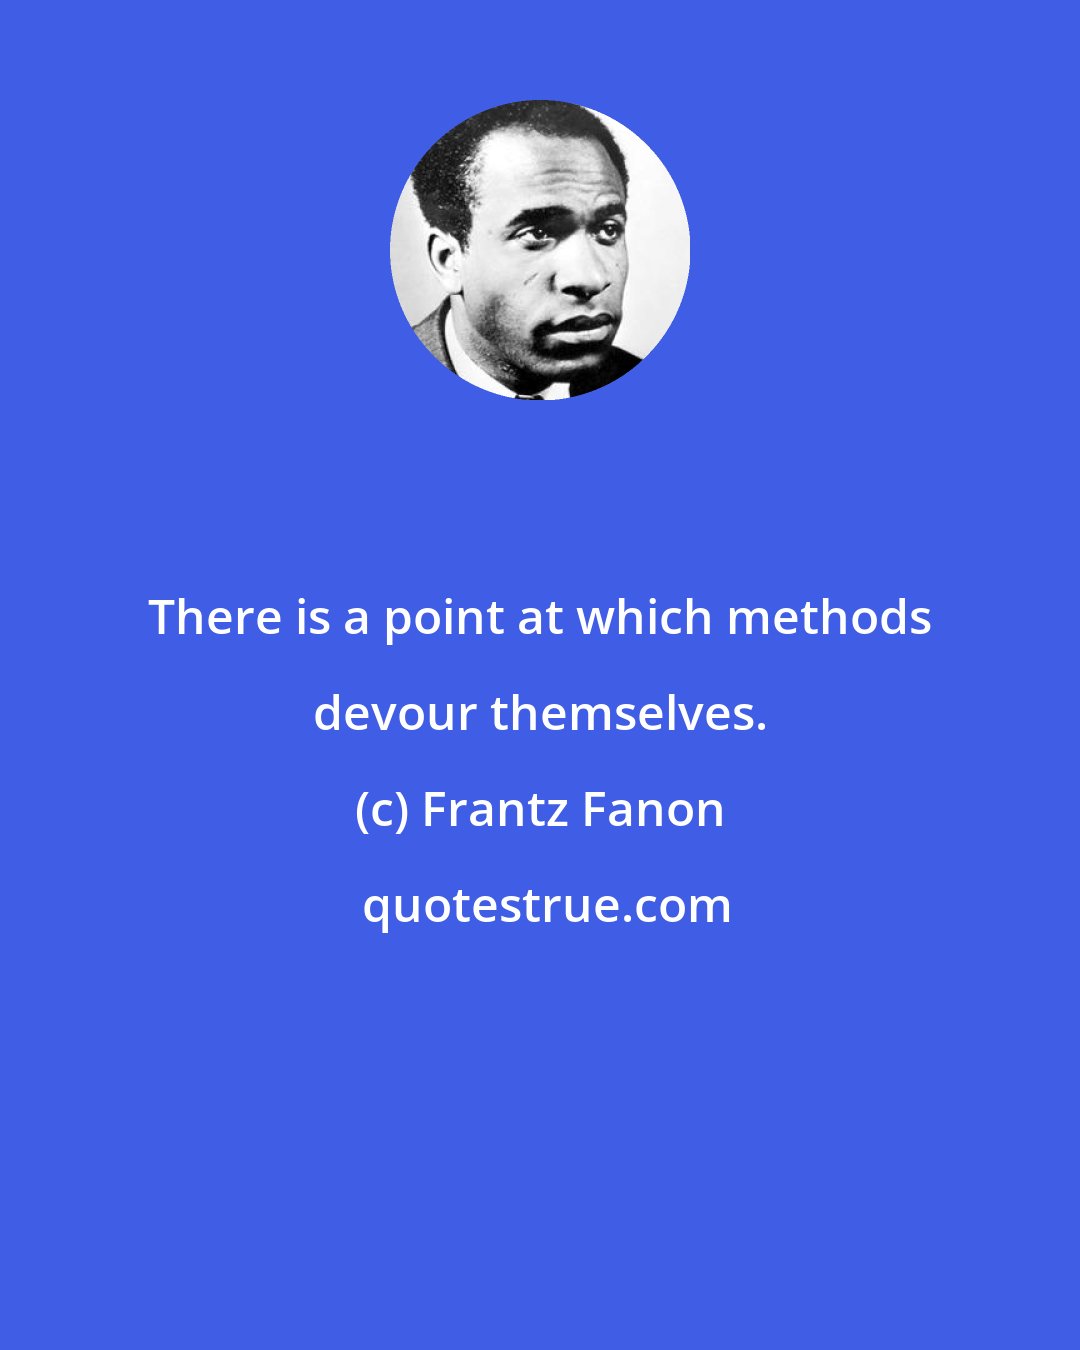 Frantz Fanon: There is a point at which methods devour themselves.